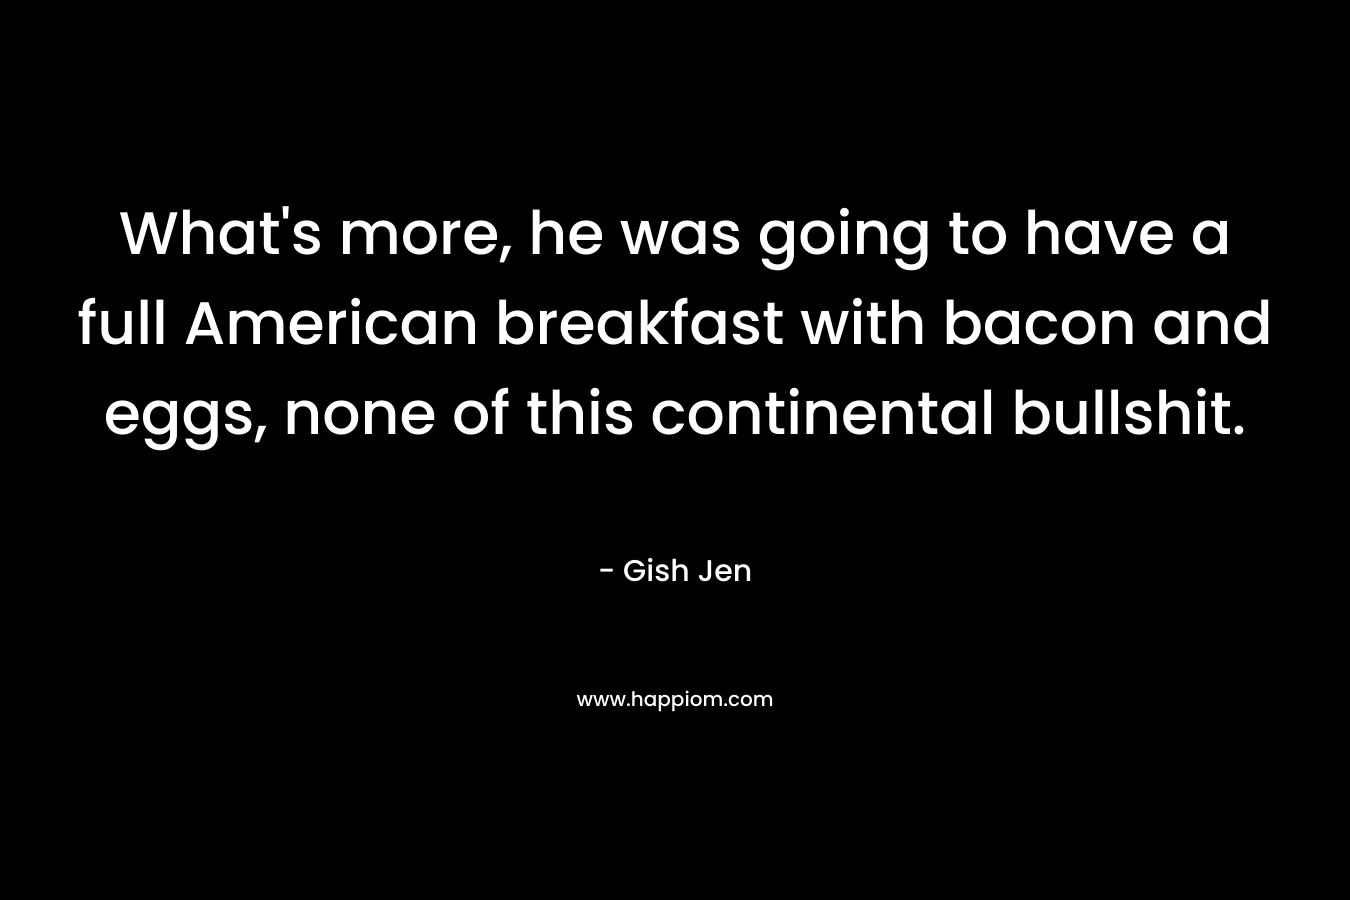 What's more, he was going to have a full American breakfast with bacon and eggs, none of this continental bullshit.